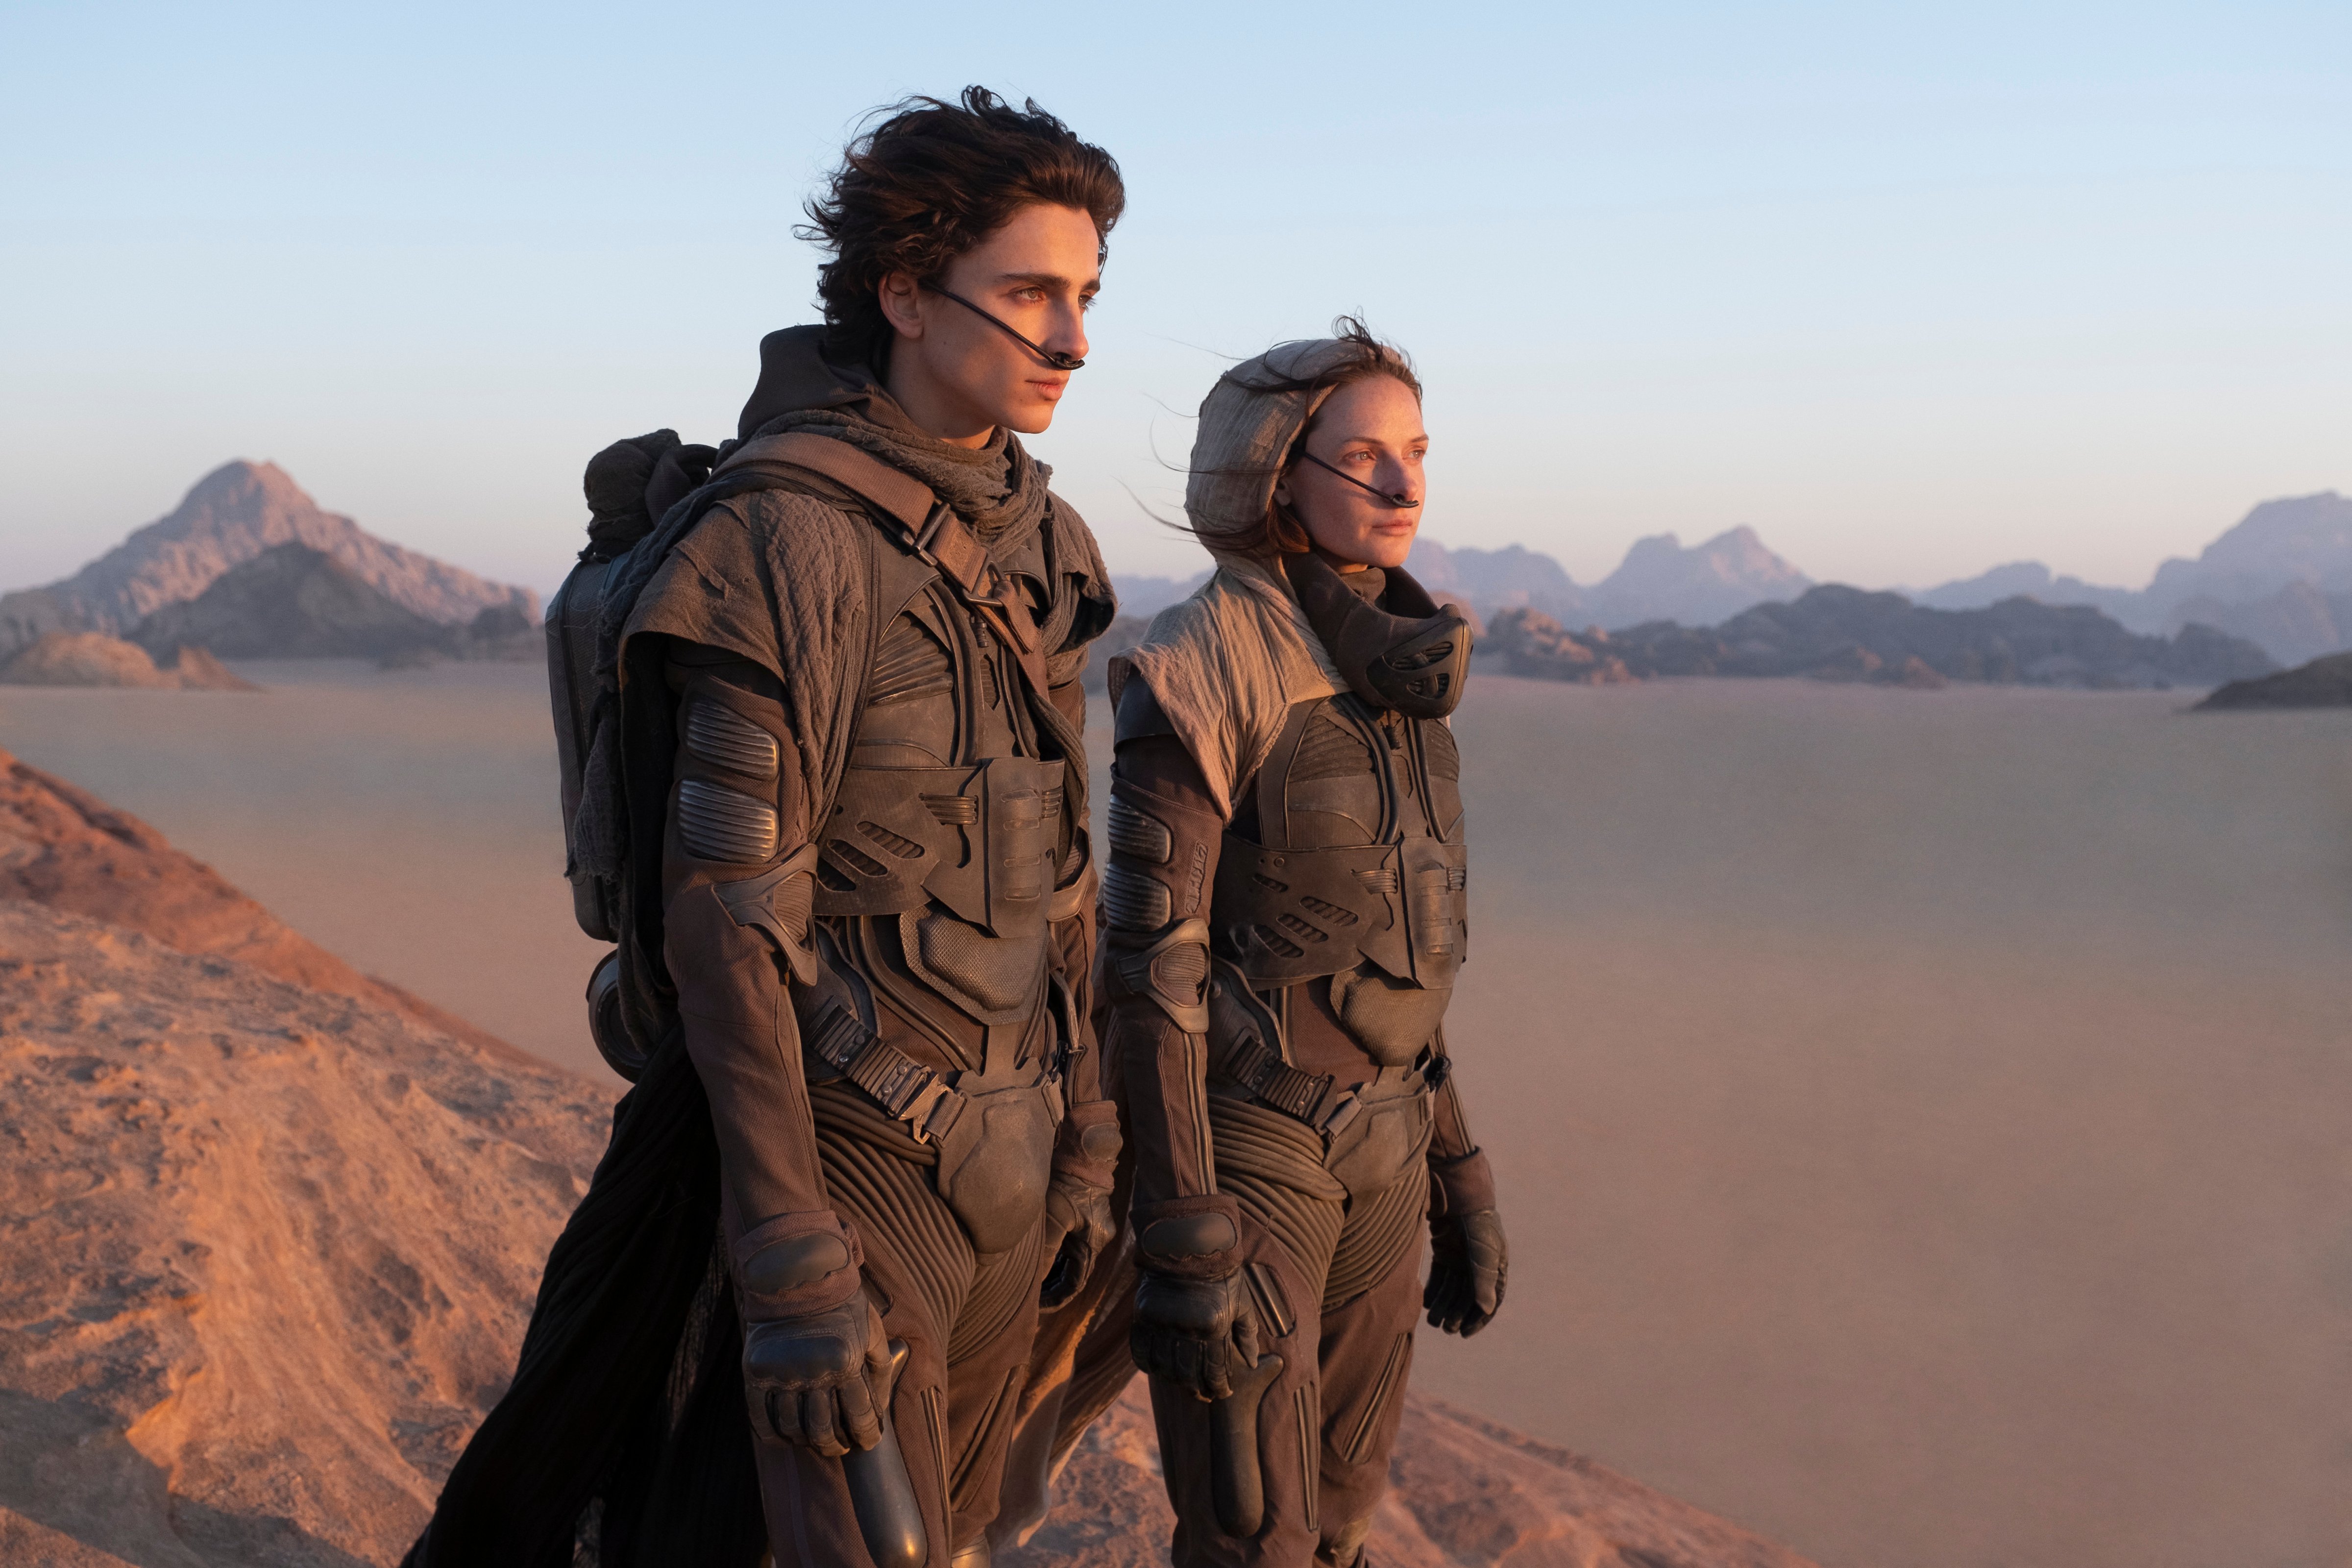 Timothée Chalamet and Rebecca Ferguson in 'Dune,' 2021 (Chiabella James © 2020 Warner Bros. Entertainment Inc. All Rights Reserved.)